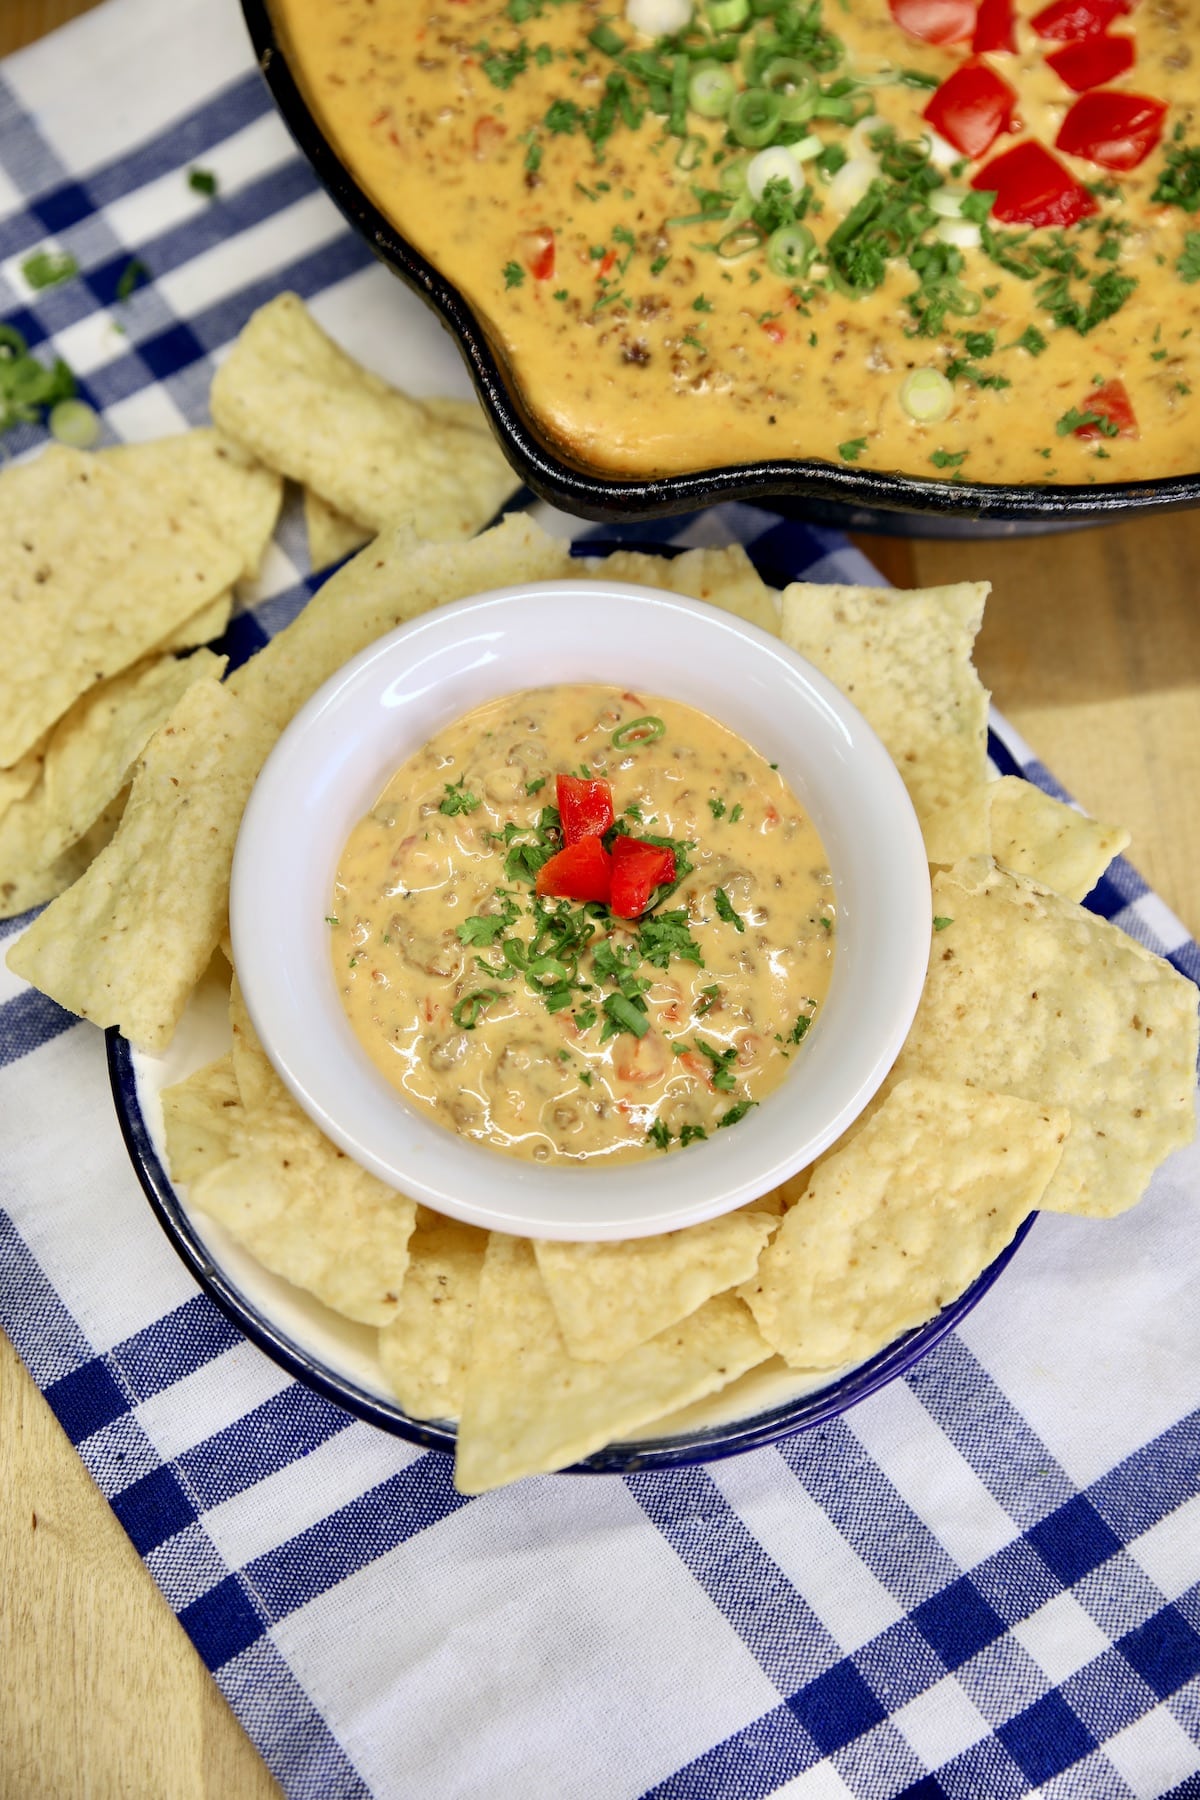 Small bowl of venison queso with tortilla chips.